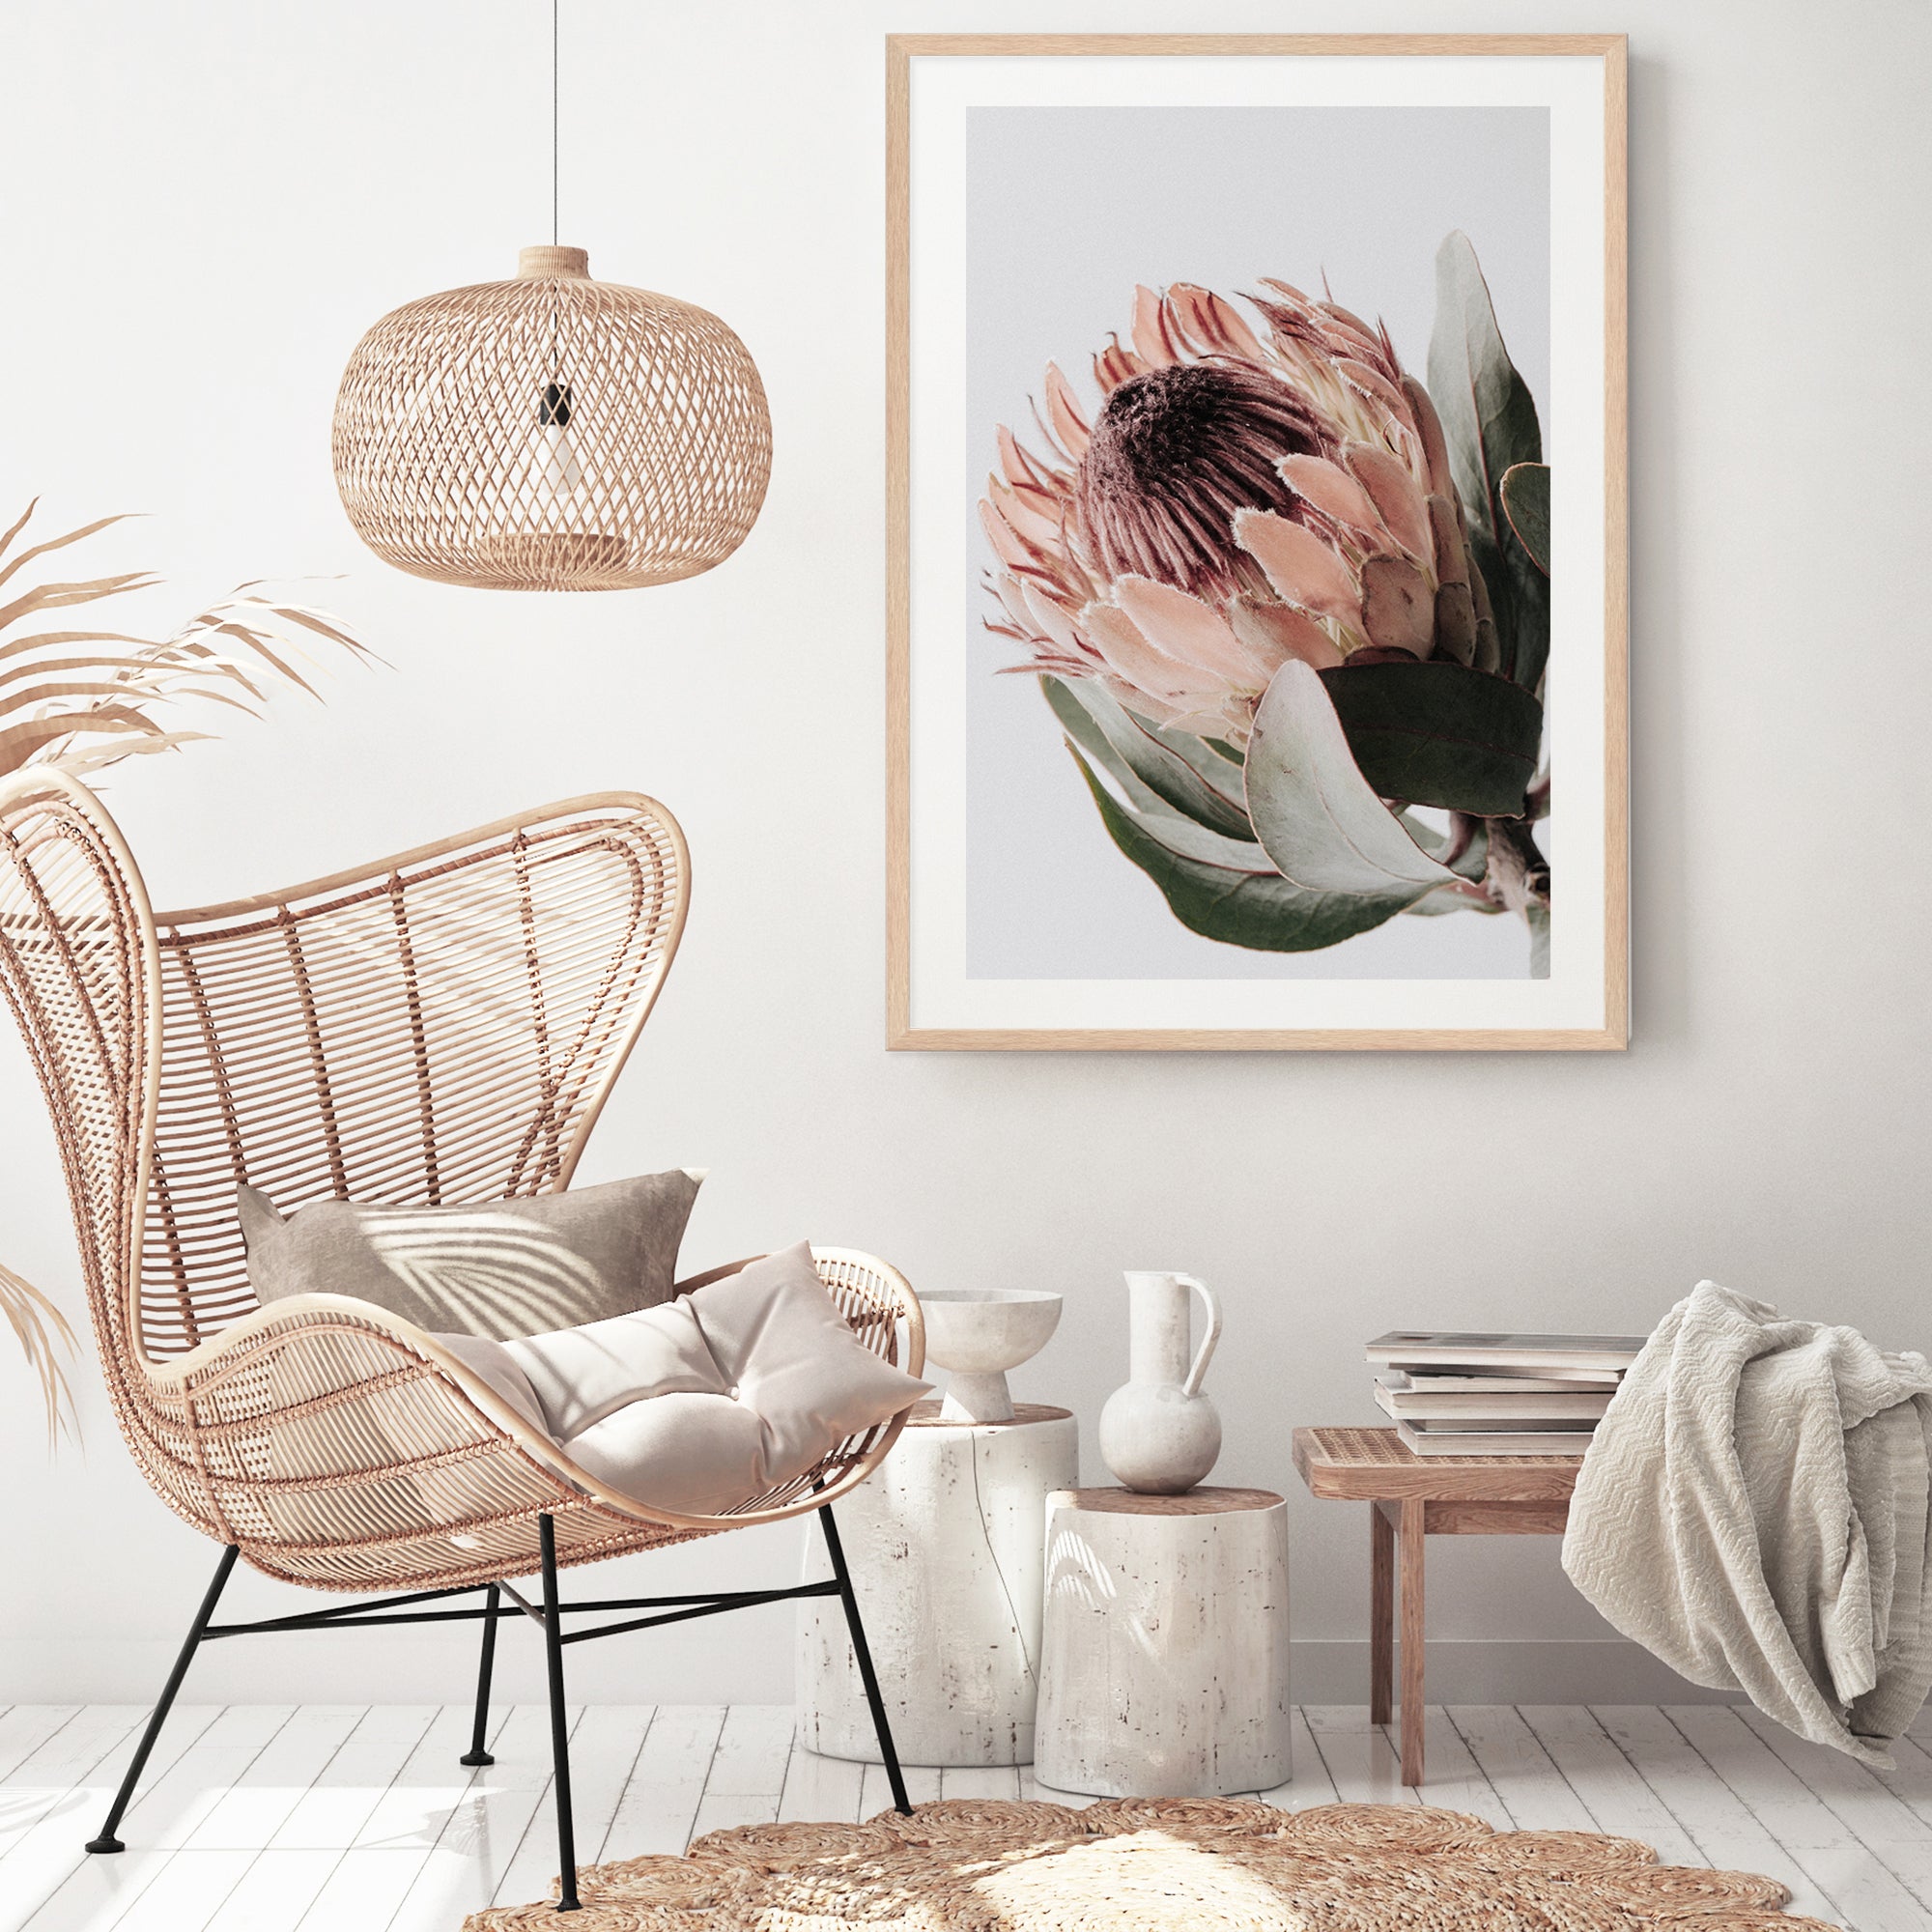 A beautiful peach protea flower with green leaves in muted tones available as a framed or unframed artwork print.